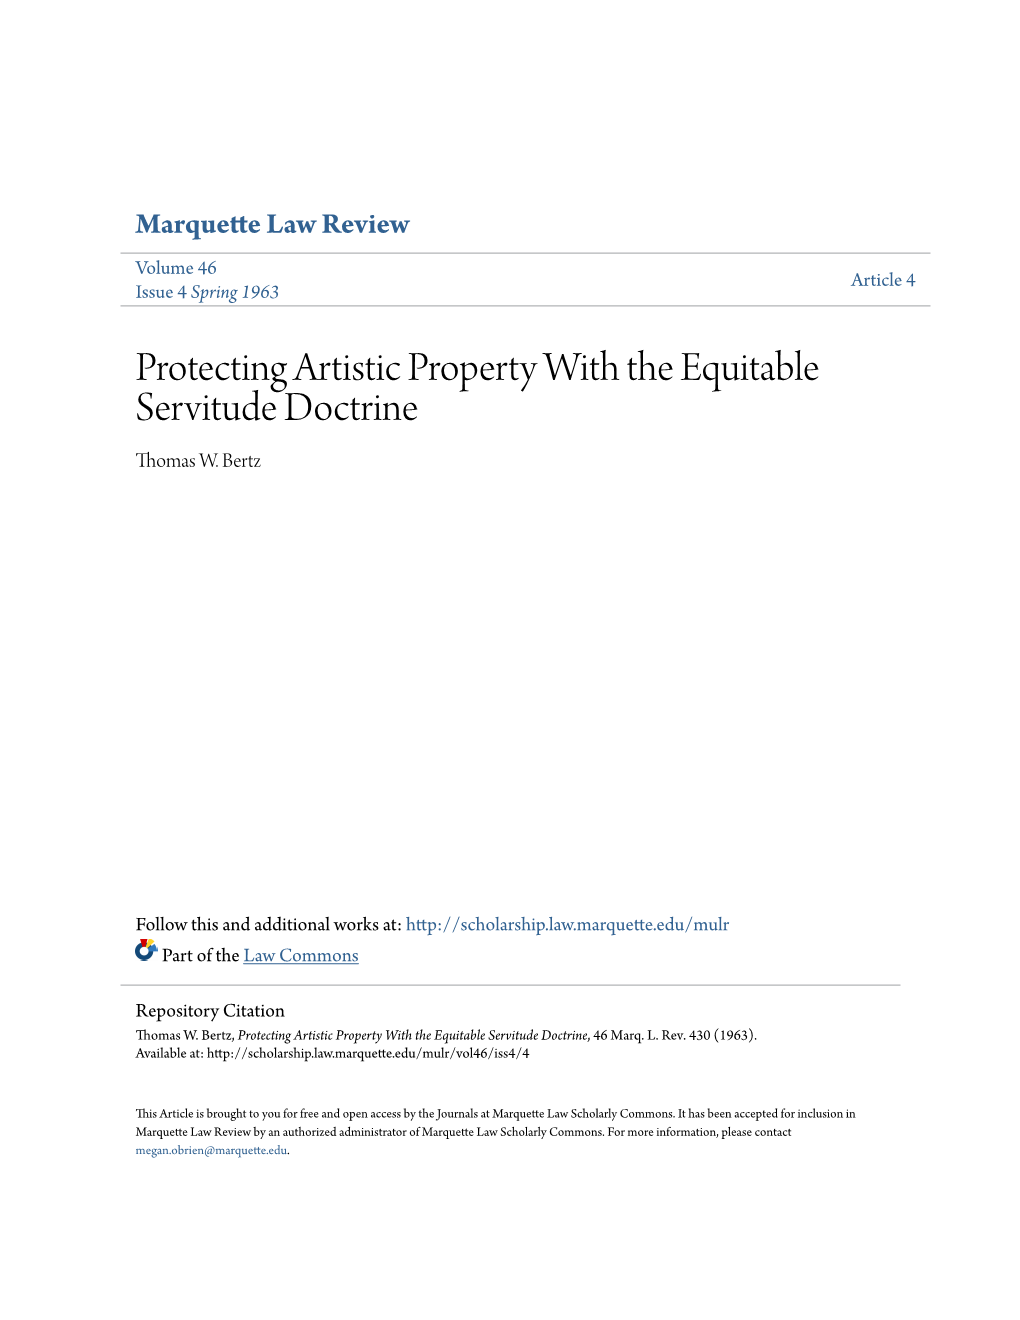 Protecting Artistic Property with the Equitable Servitude Doctrine Thomas W